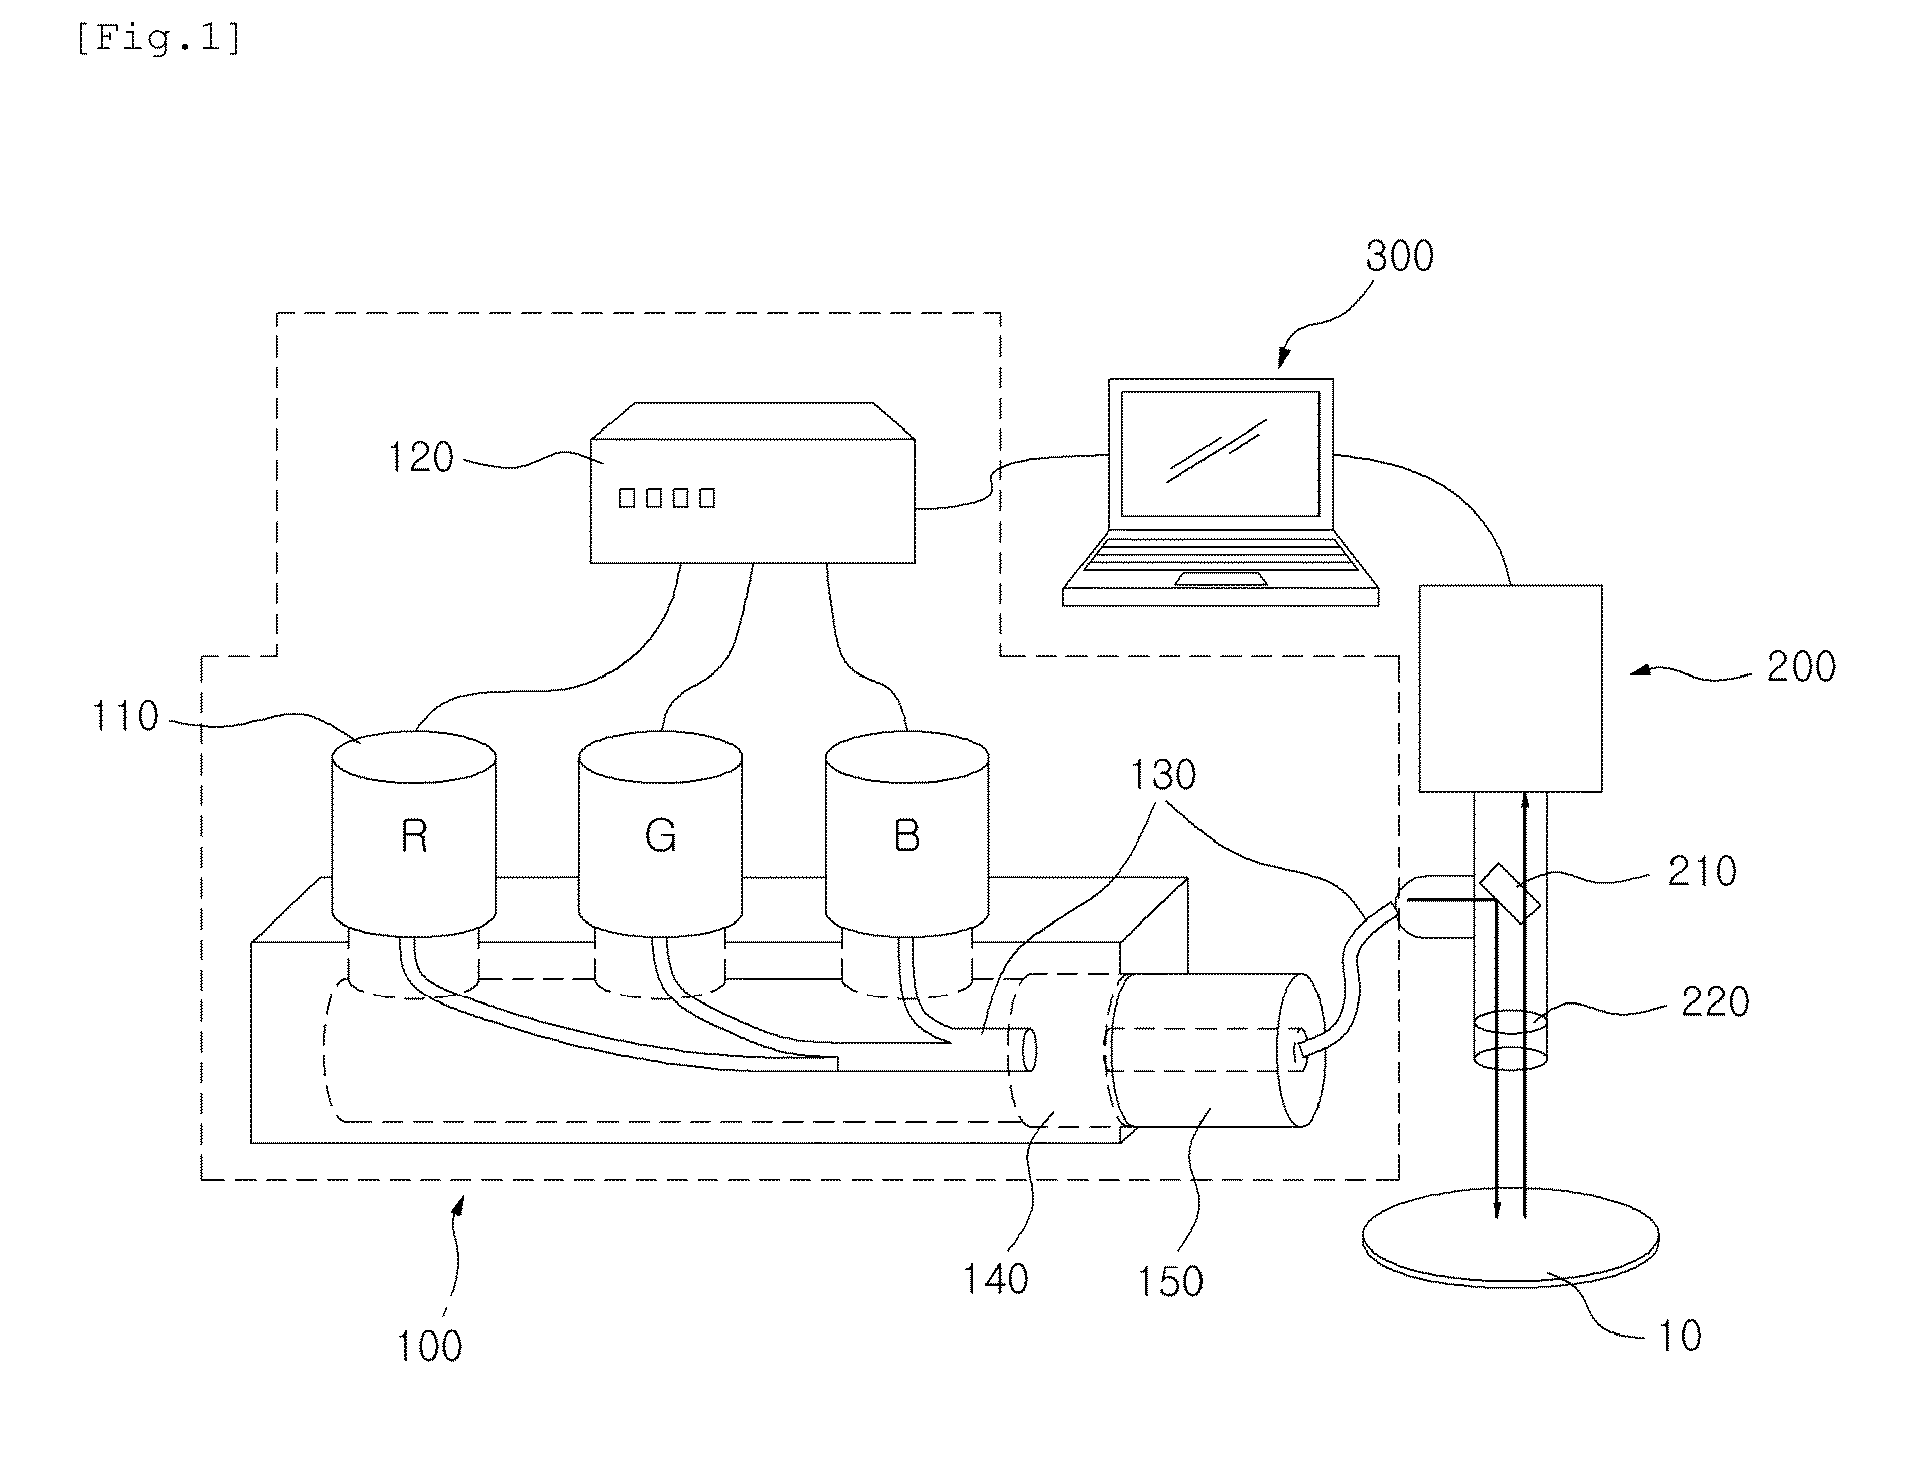 Colour lighting control method for improving image quality in a vision system